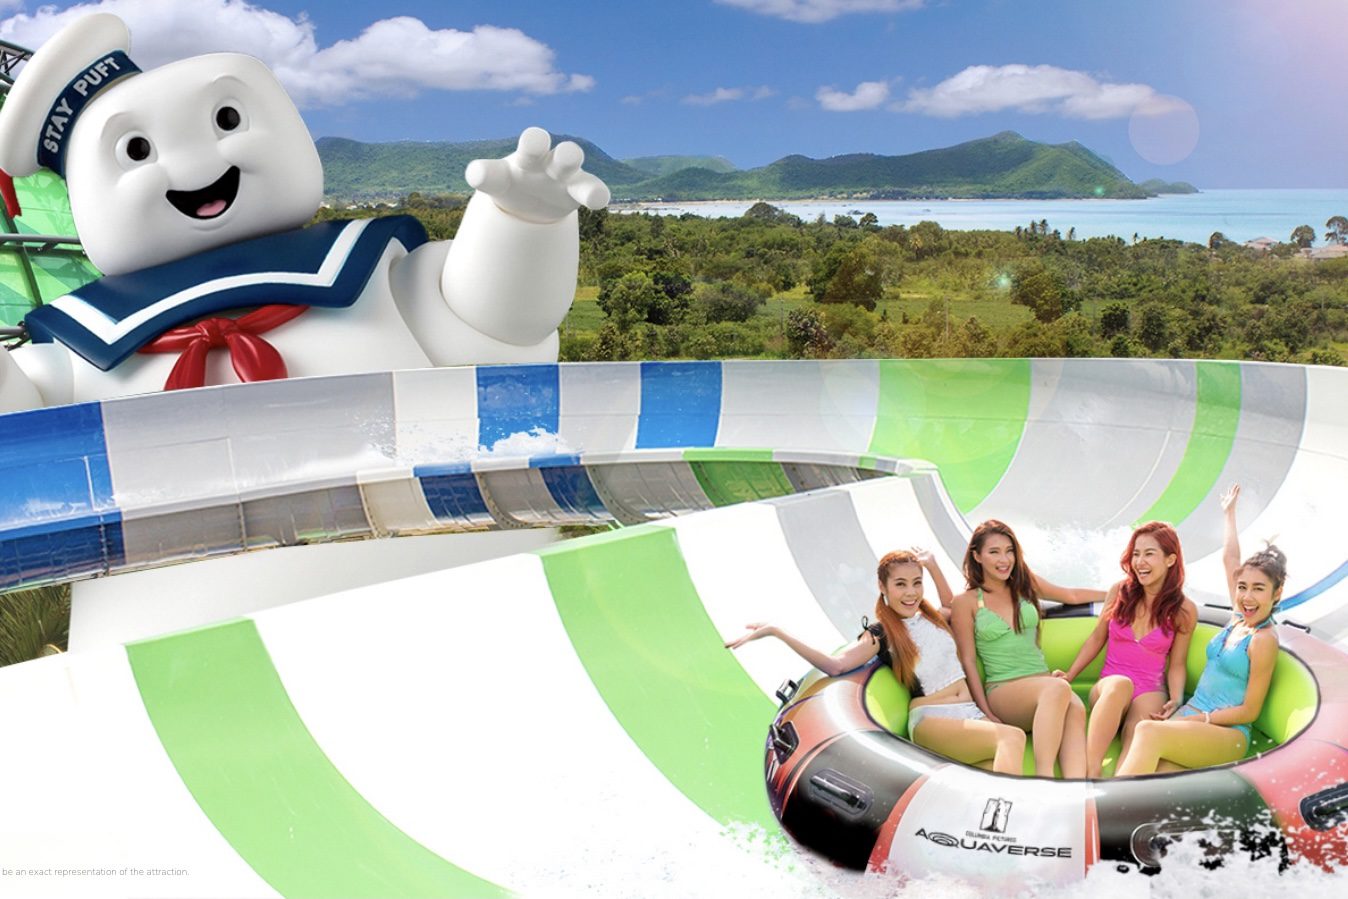 A rendering of a Ghostbusters-themed slide at the new Aquaverse theme park in Thailand. 